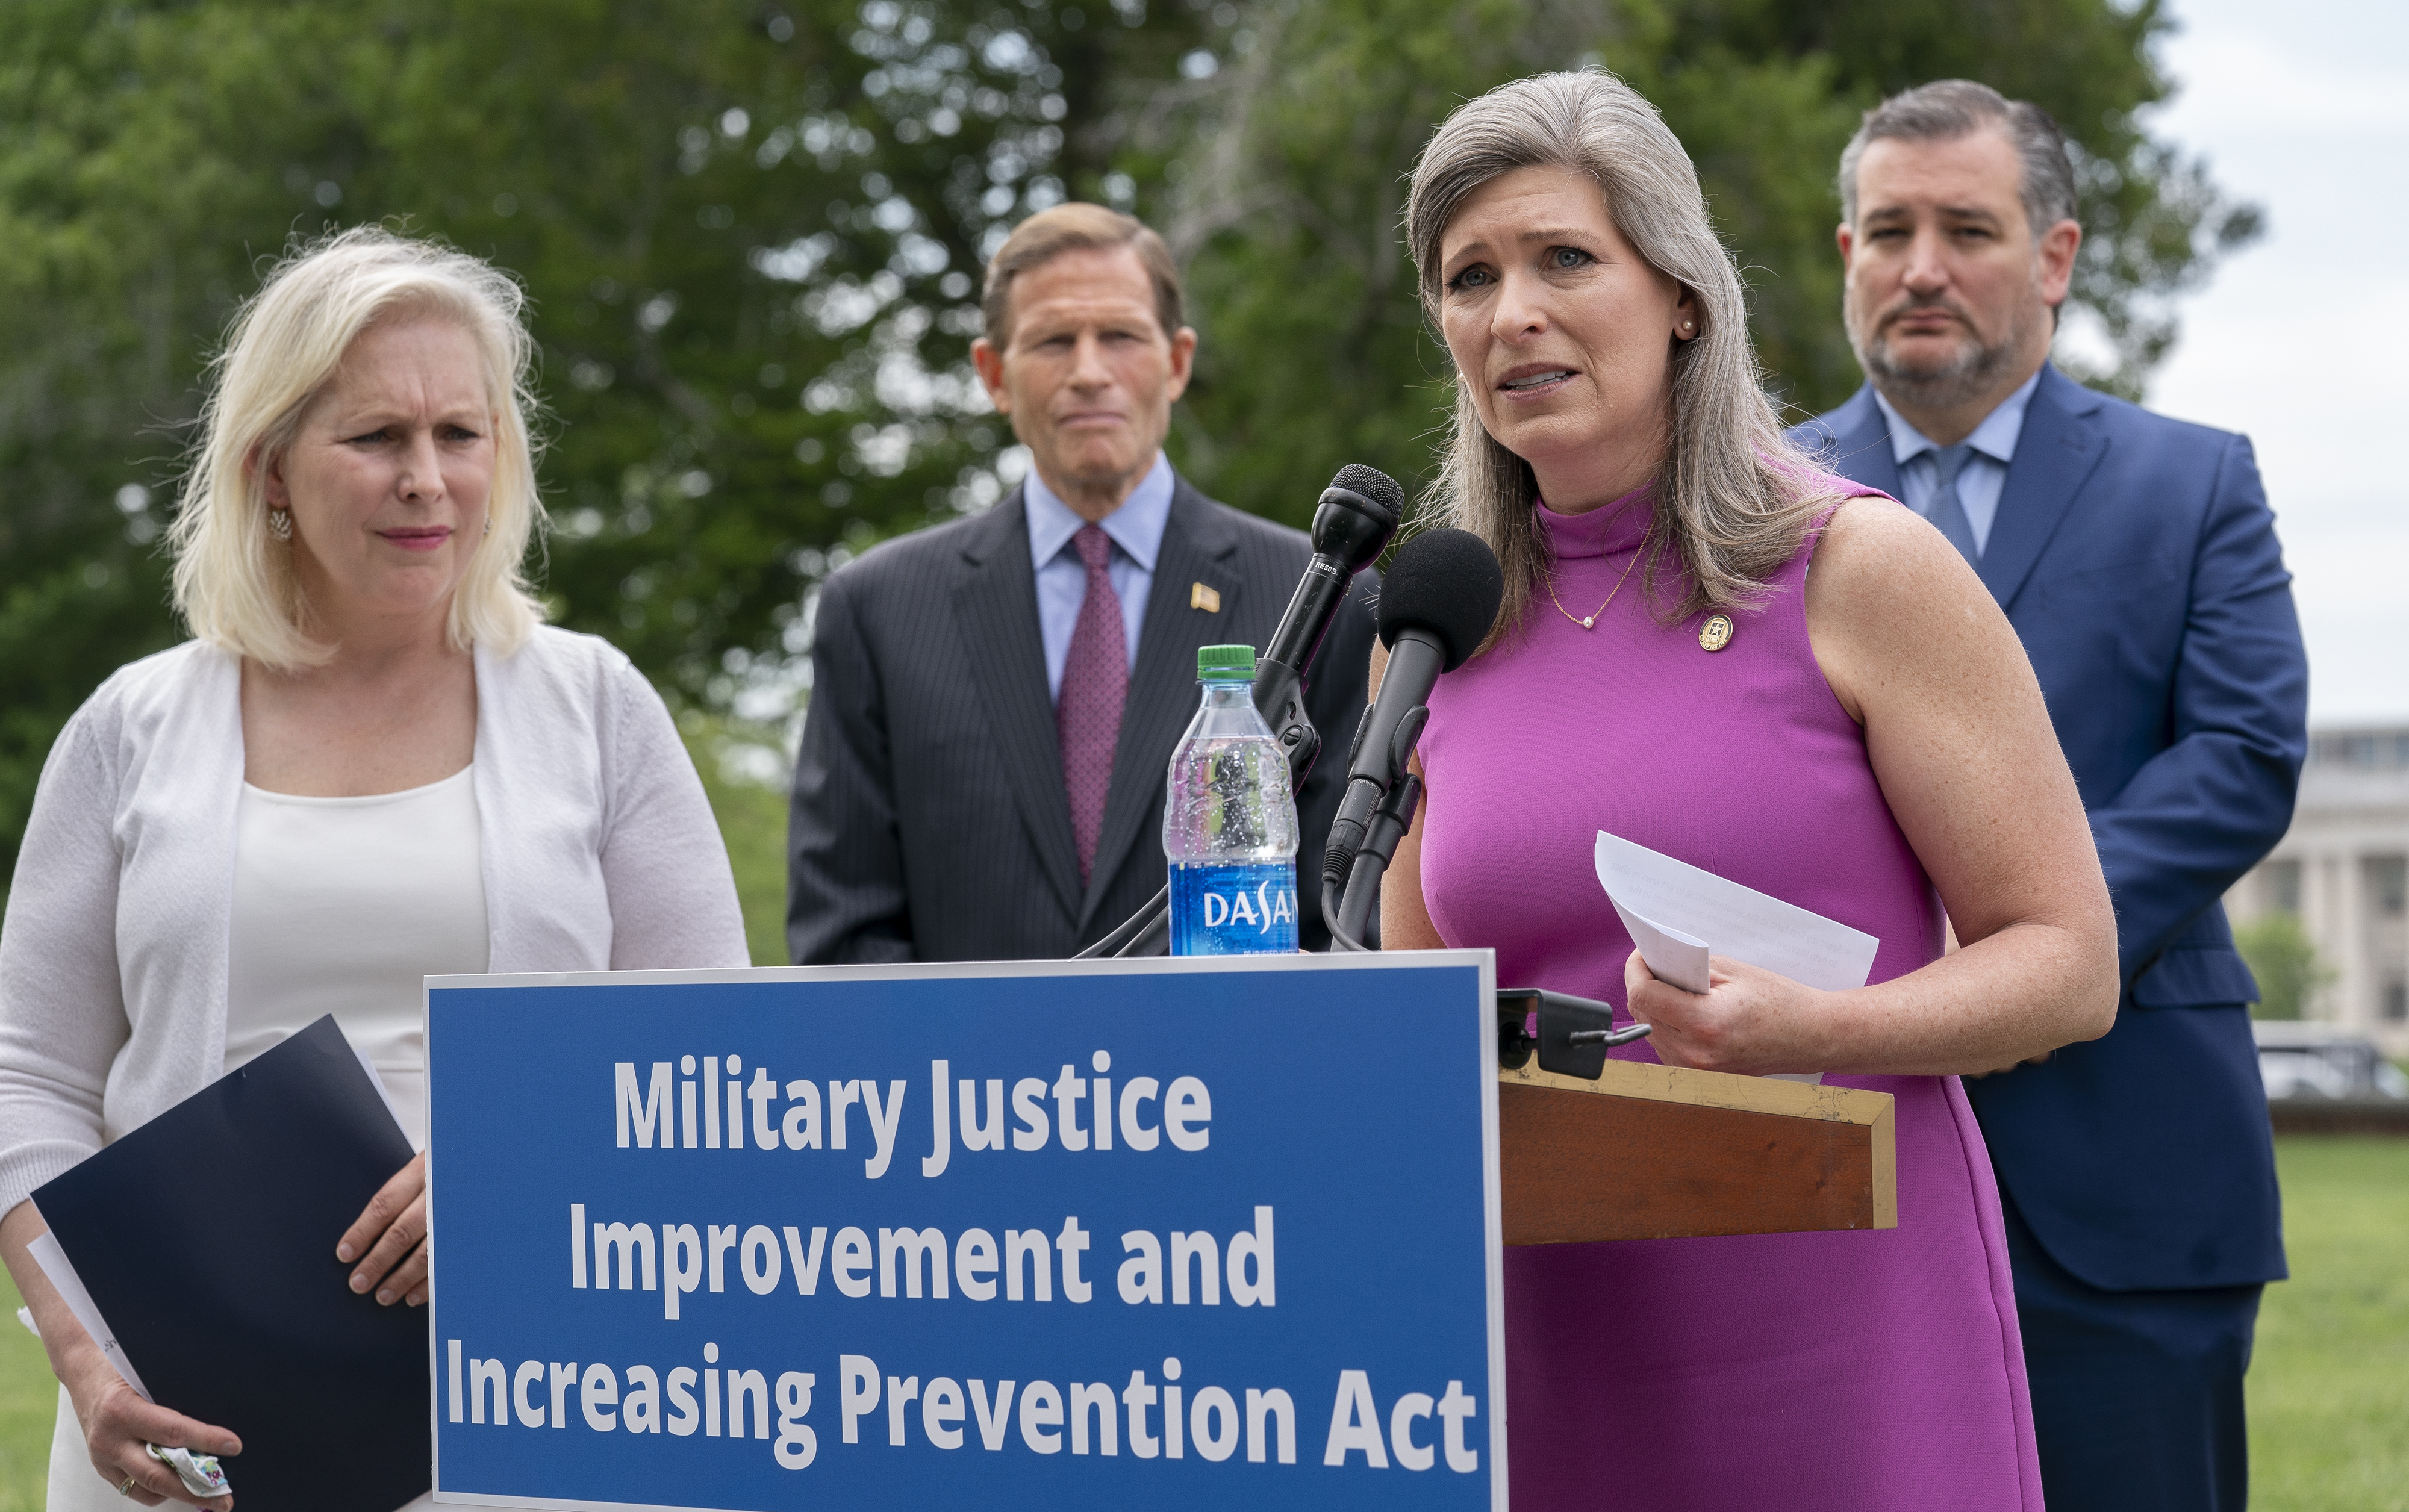 For years, New York Democratic Sen. Kirsten Gillibrand (left) has sought approval of her bill to reform the military's criminal justice system. This year, Gillibrand joined forces with Iowa Republican Sen. Joni Ernst, seen here, a sexual assault survivor herself before she became a combat company commander. Stefani Reynolds/Getty Images